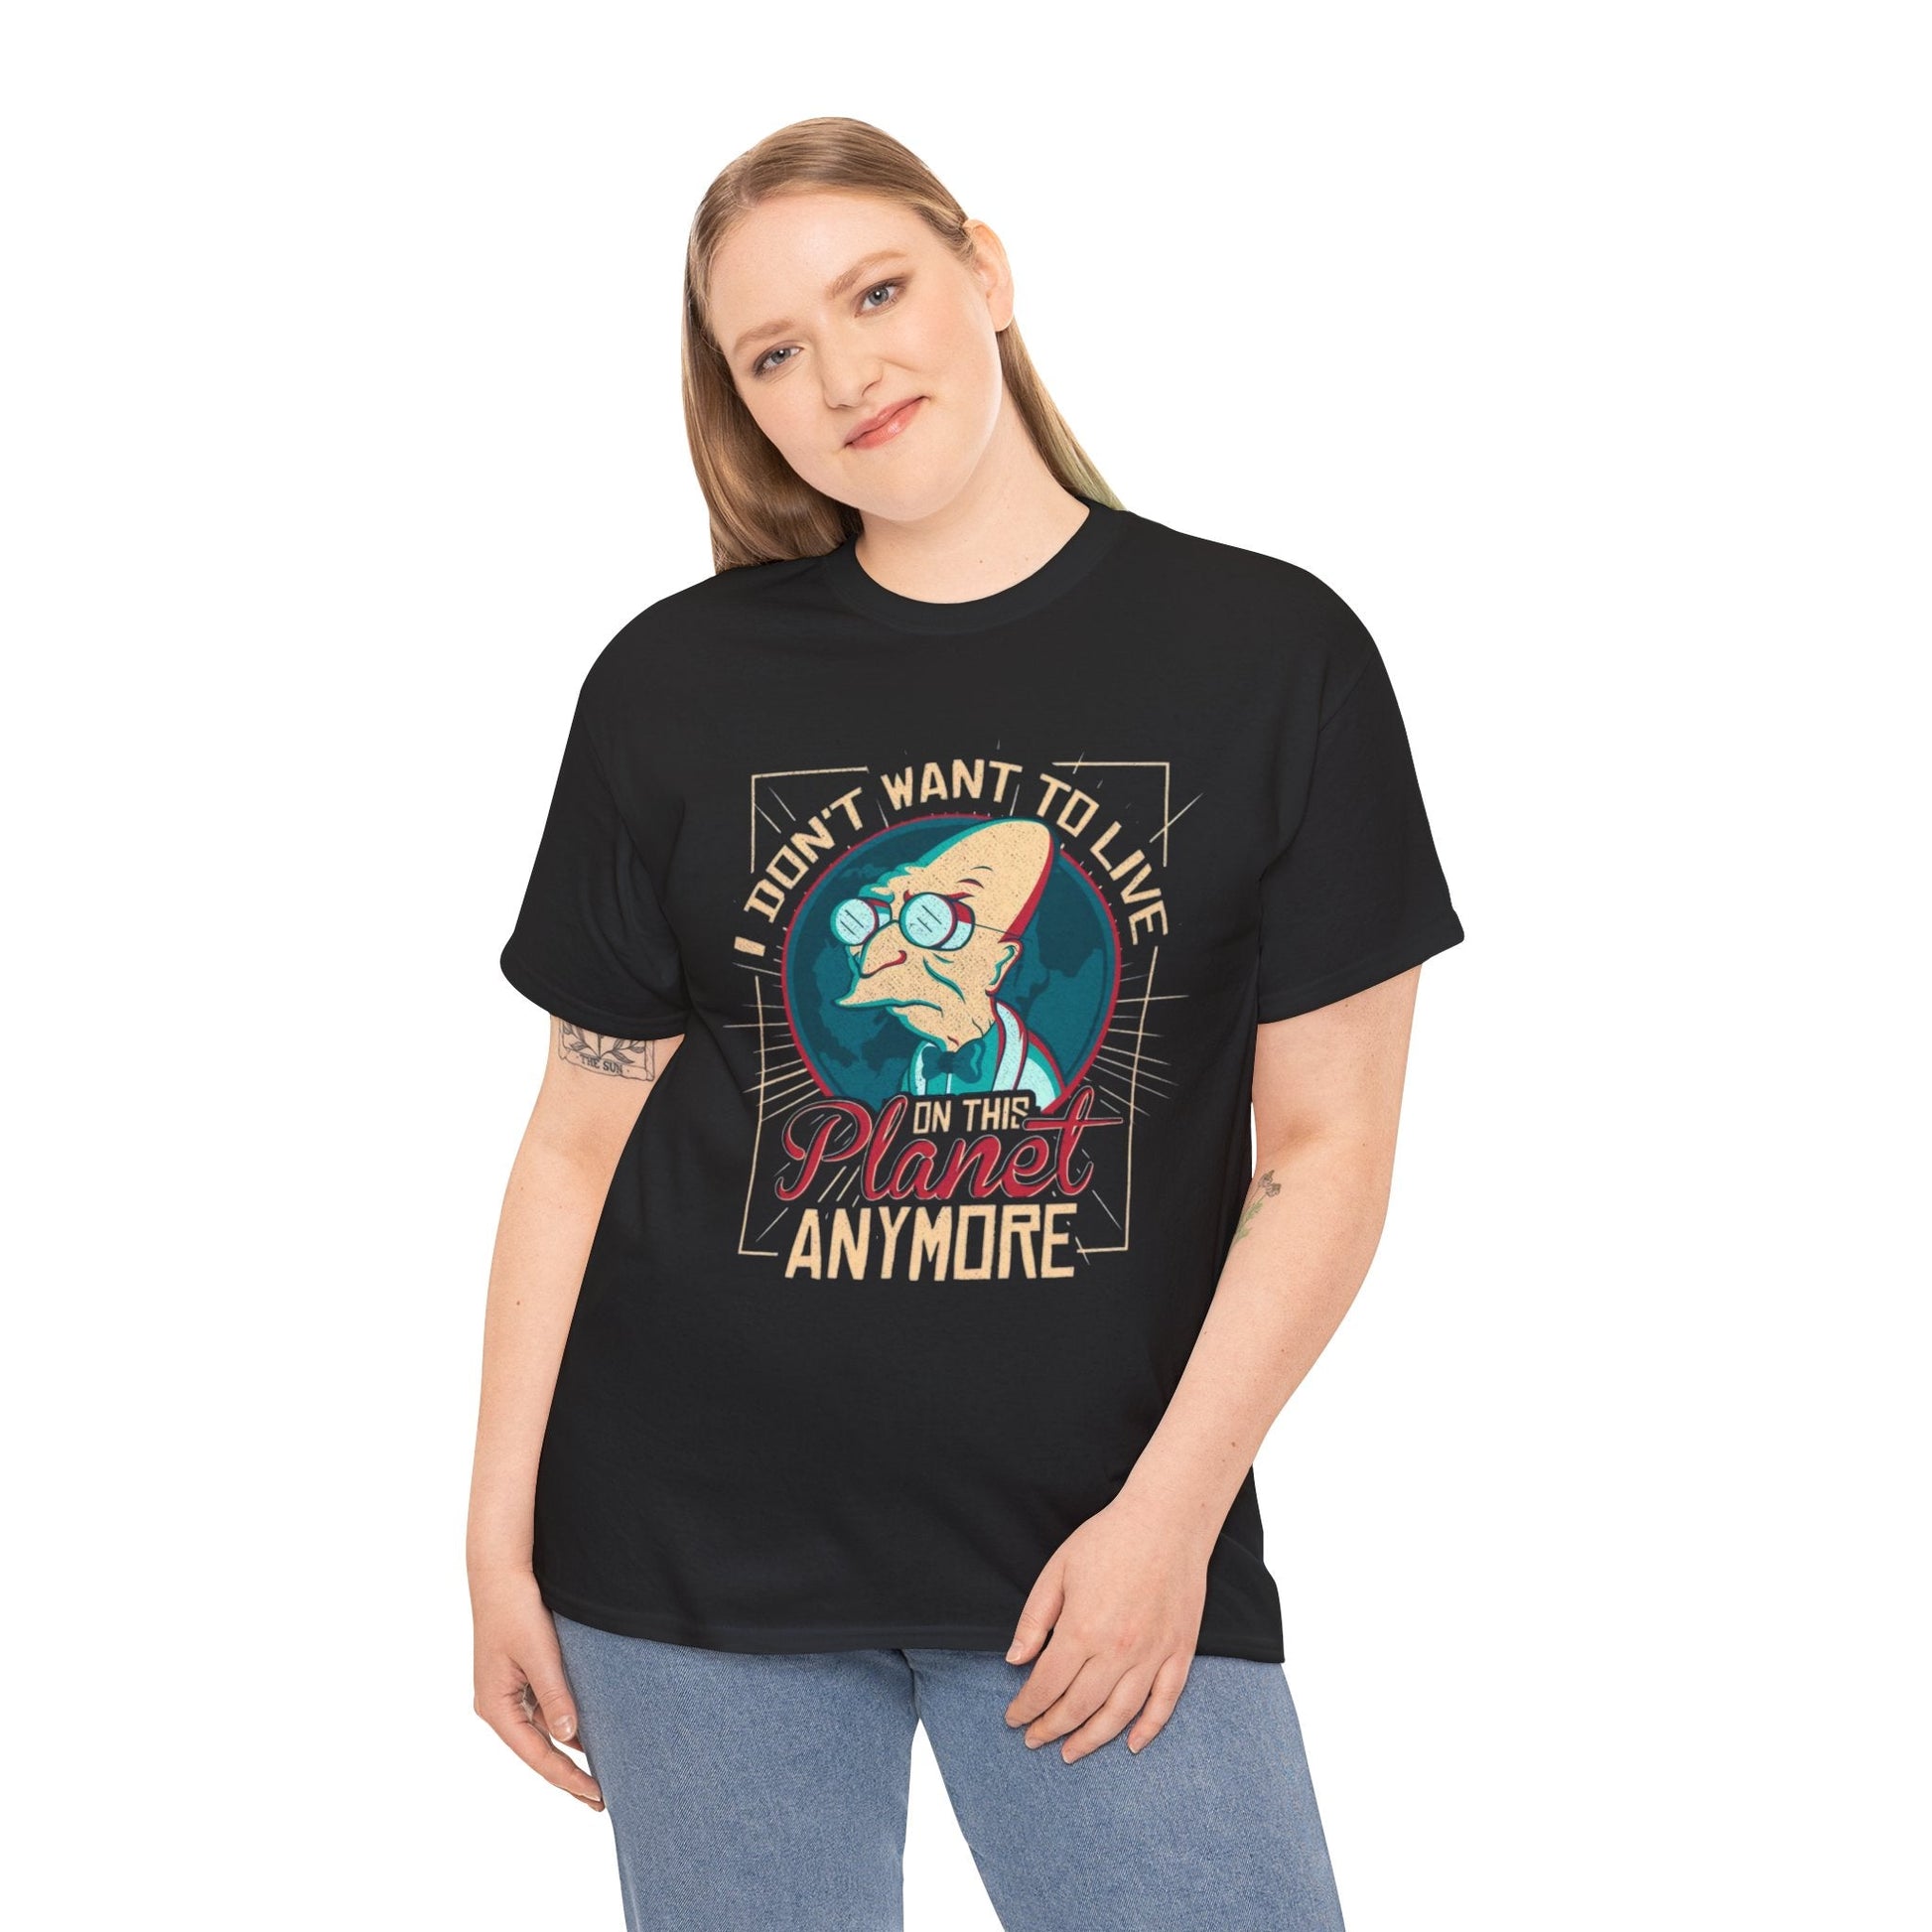 I Don’t Want To Live On This Planet Anymore Futurama T-Shirt - RetroTeeShop